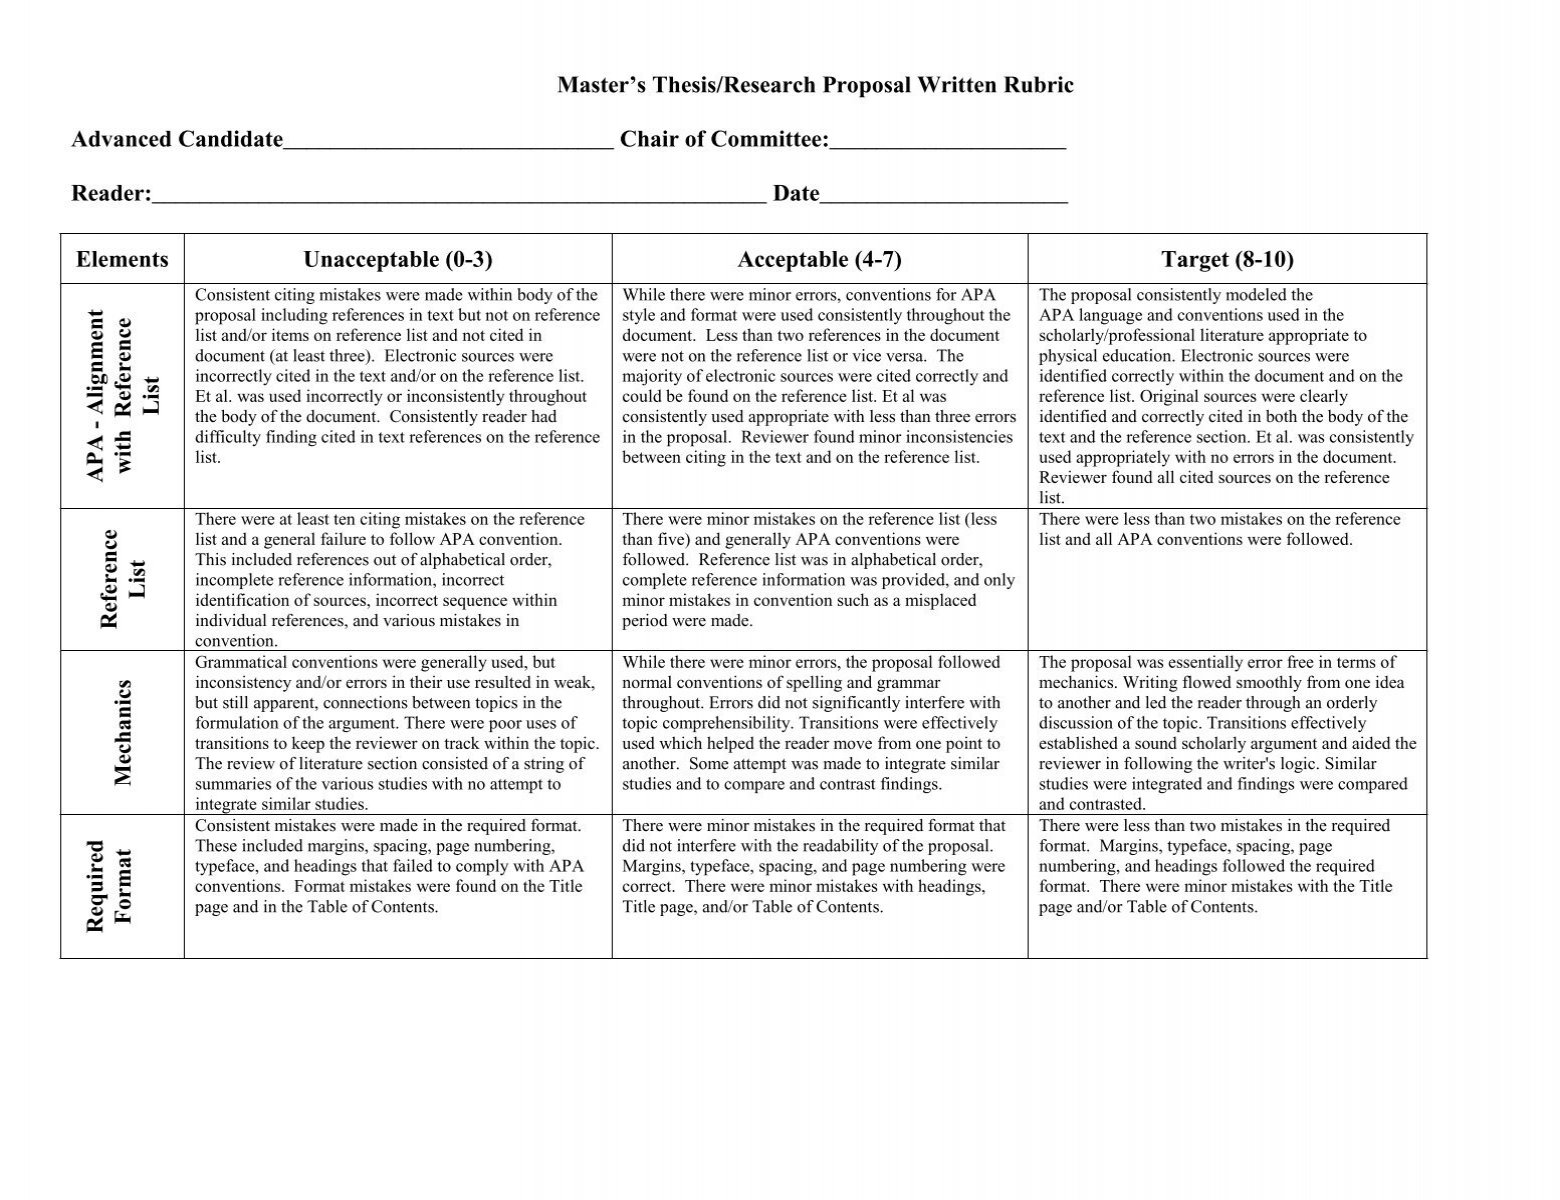 rubric for research proposal stage